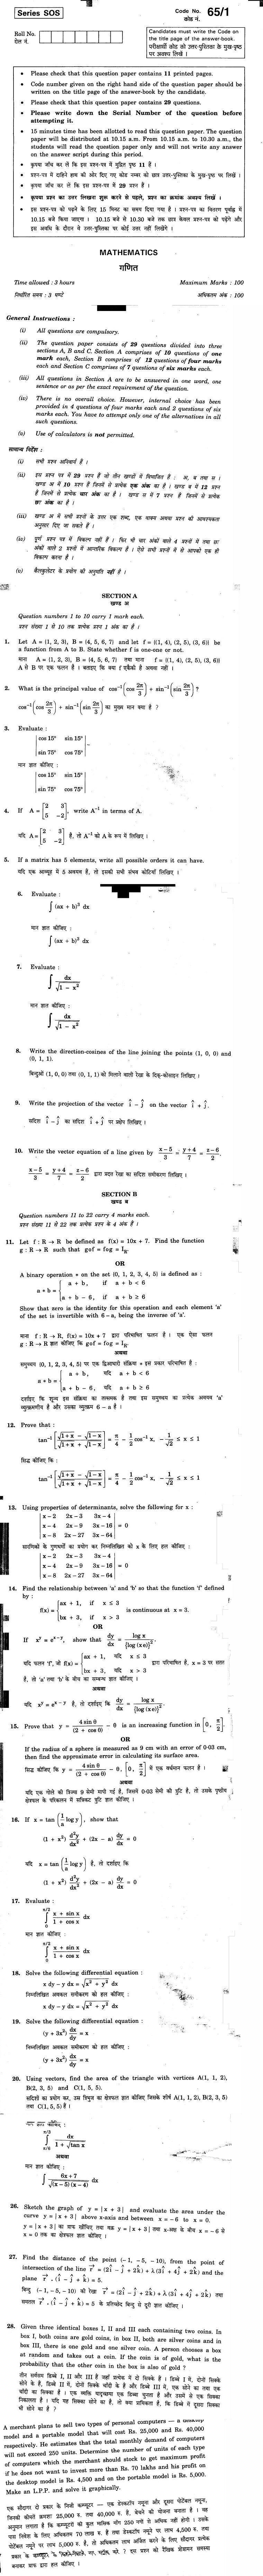 CBSE Class XII Previous Year Question Papers 2011: Mathematics